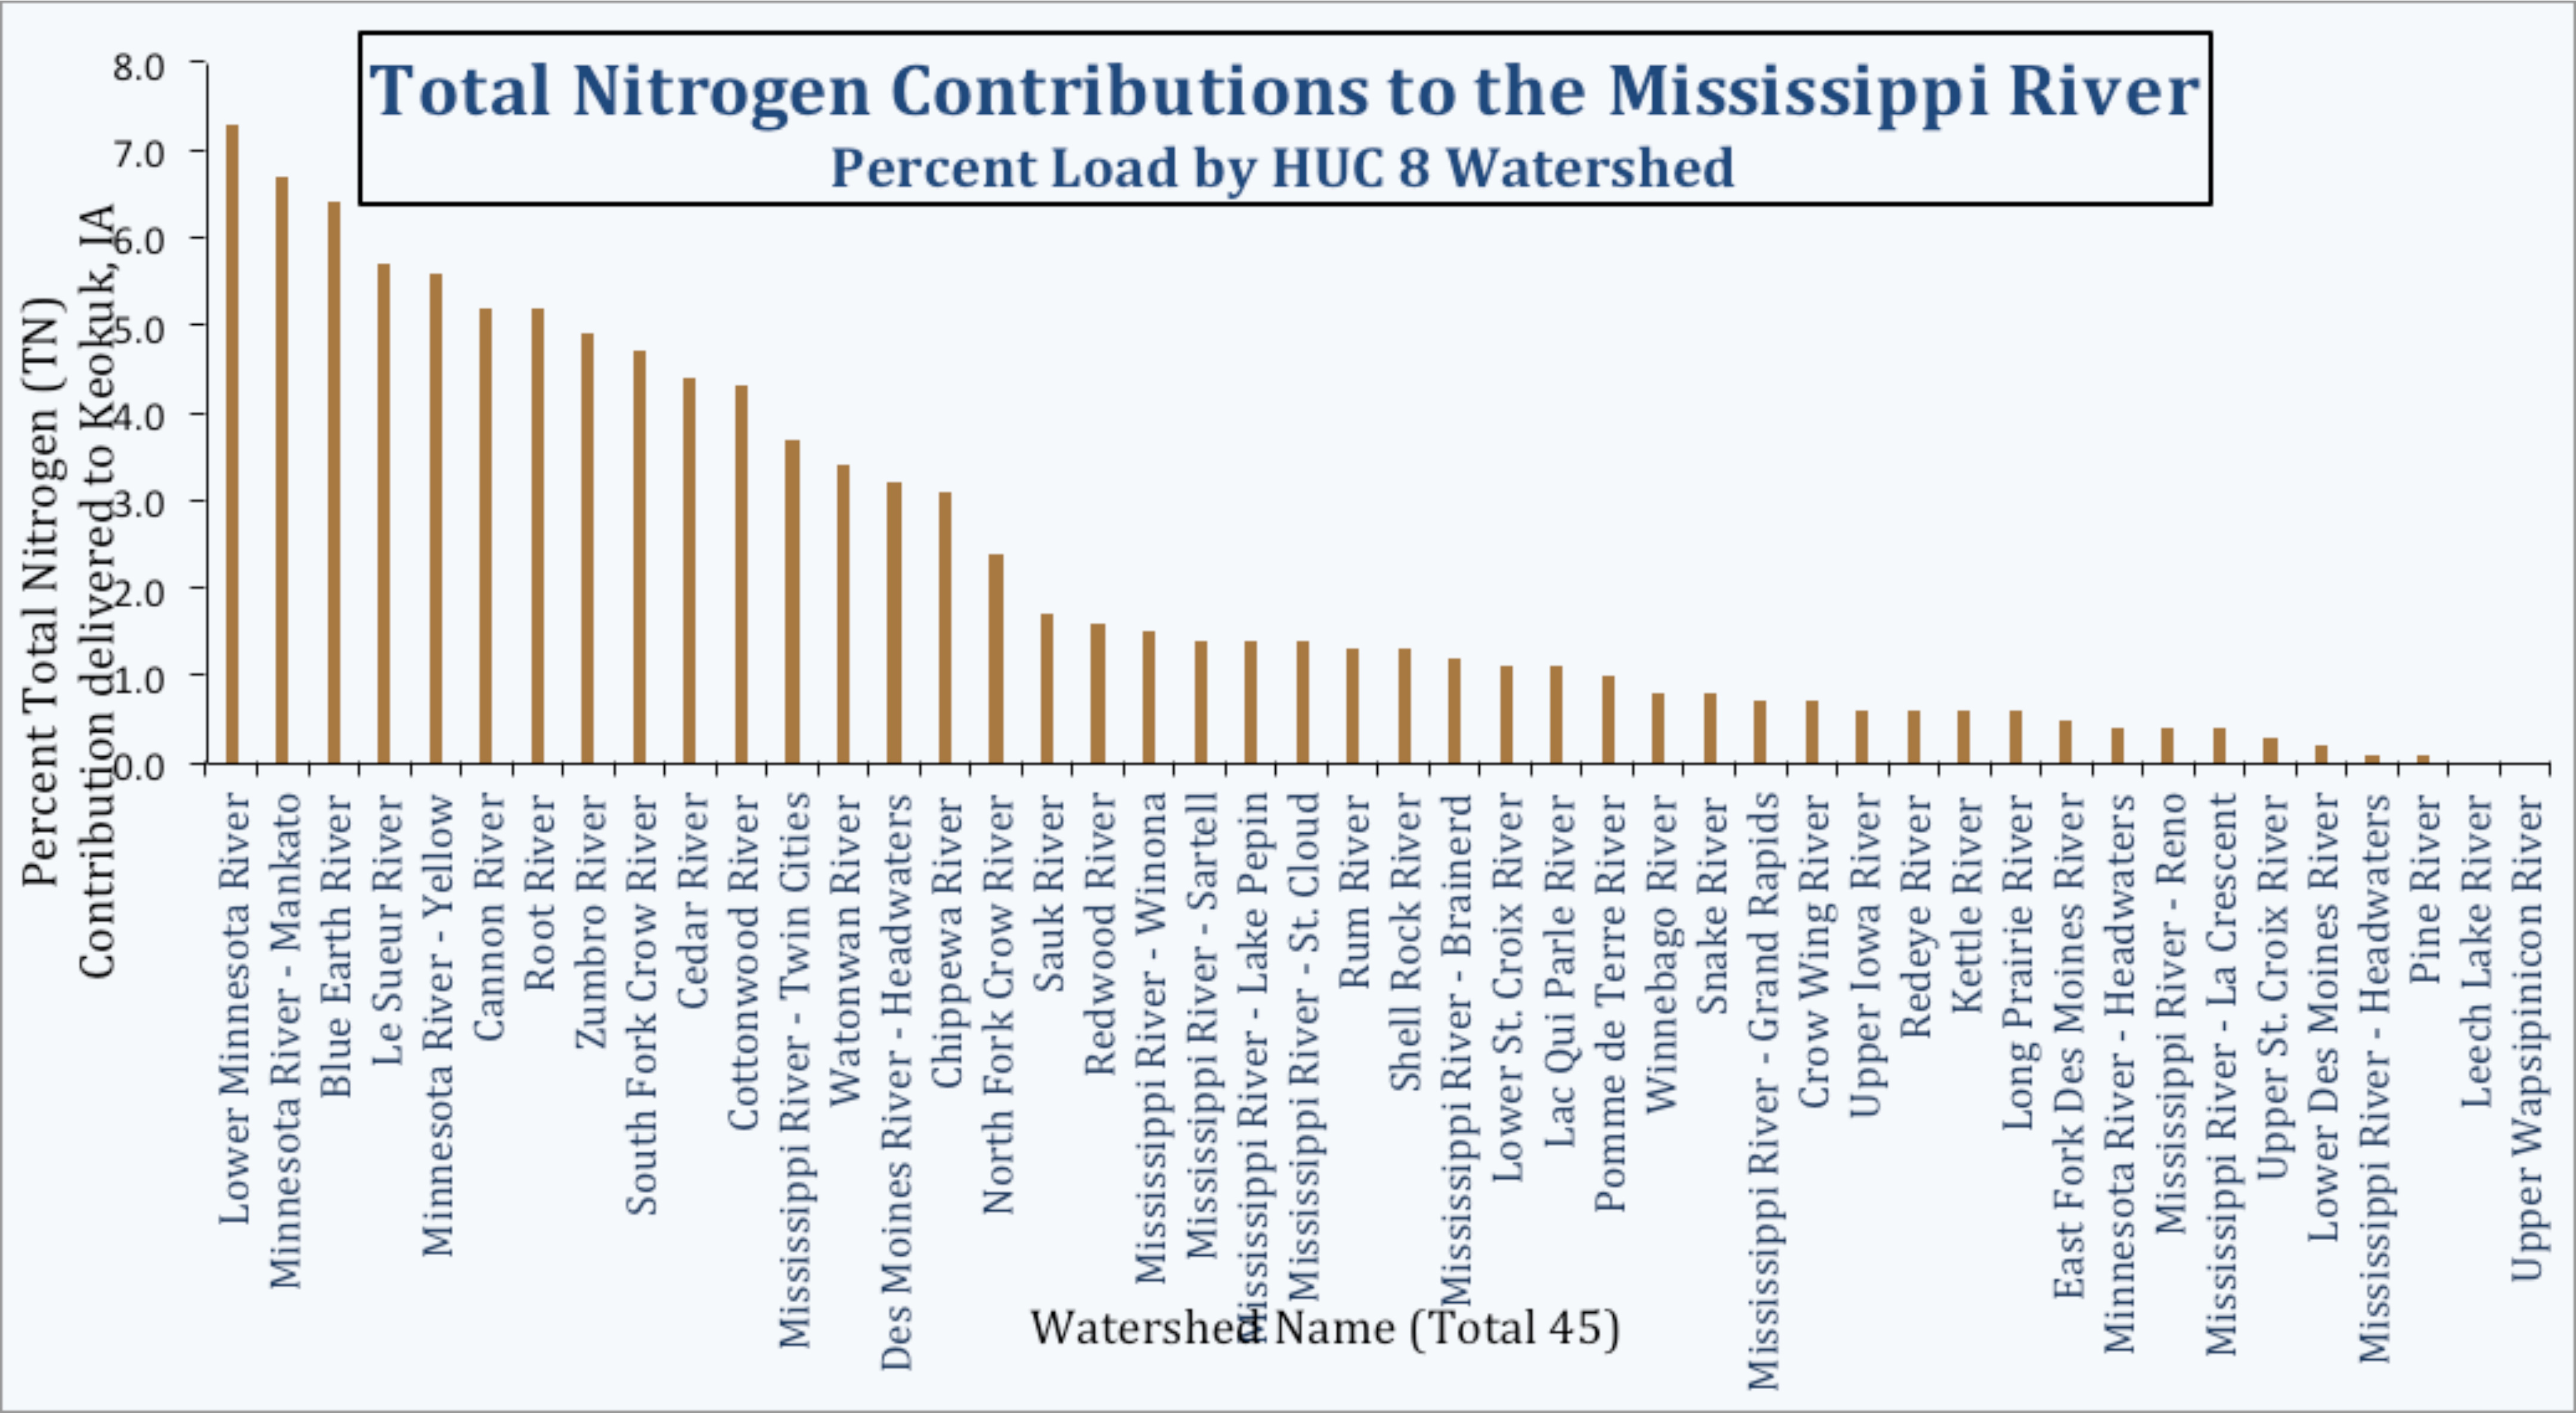 TN Contribution to the Mississippi River Chart